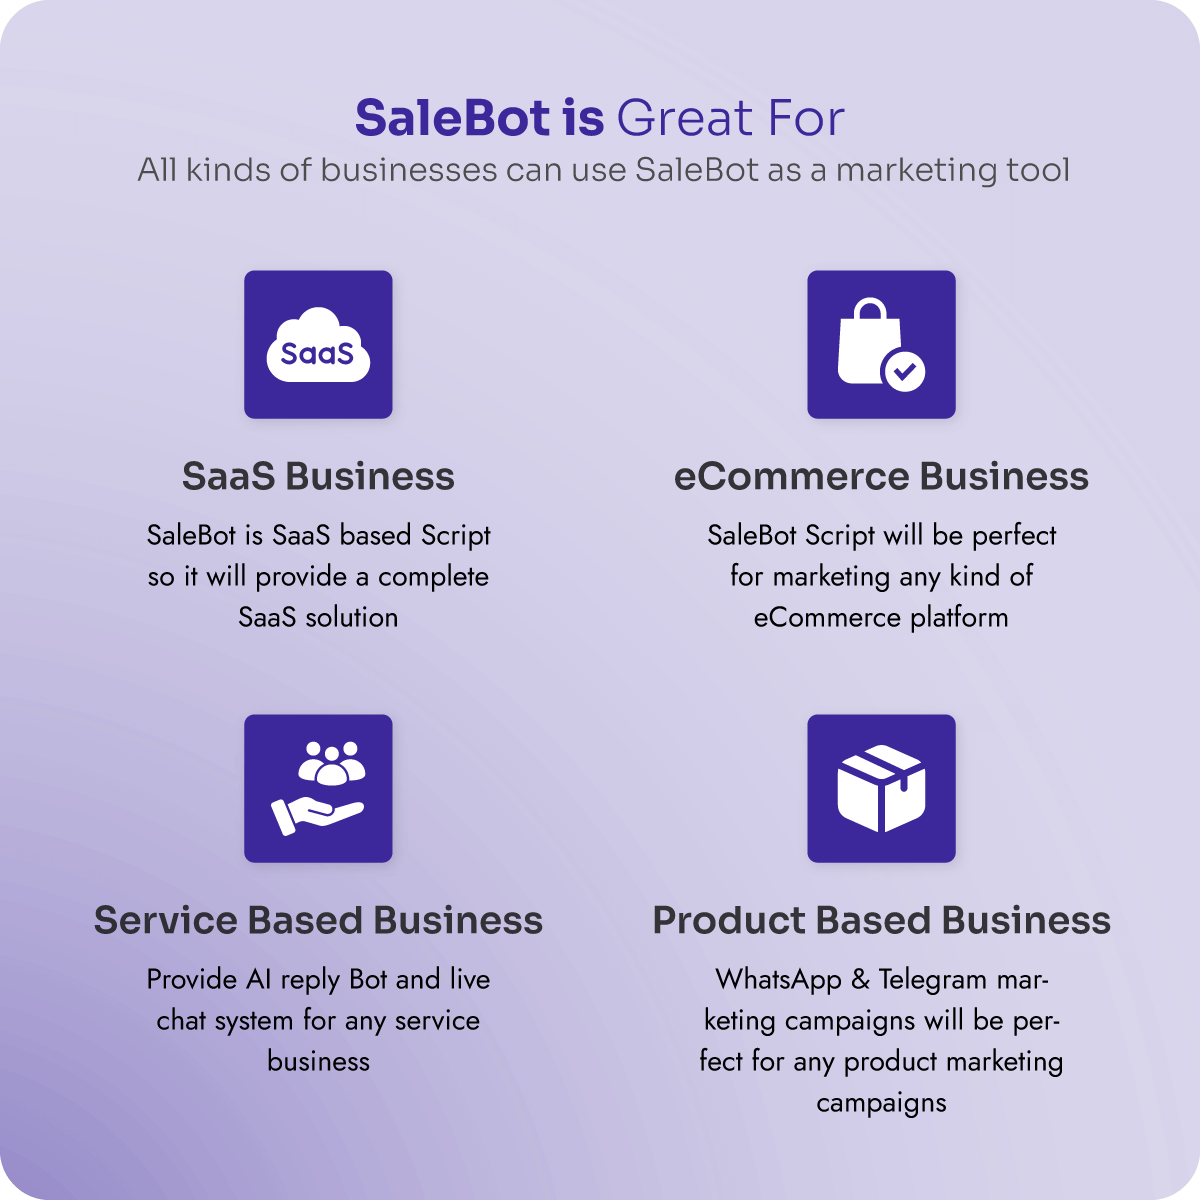 salebot-great-for-business